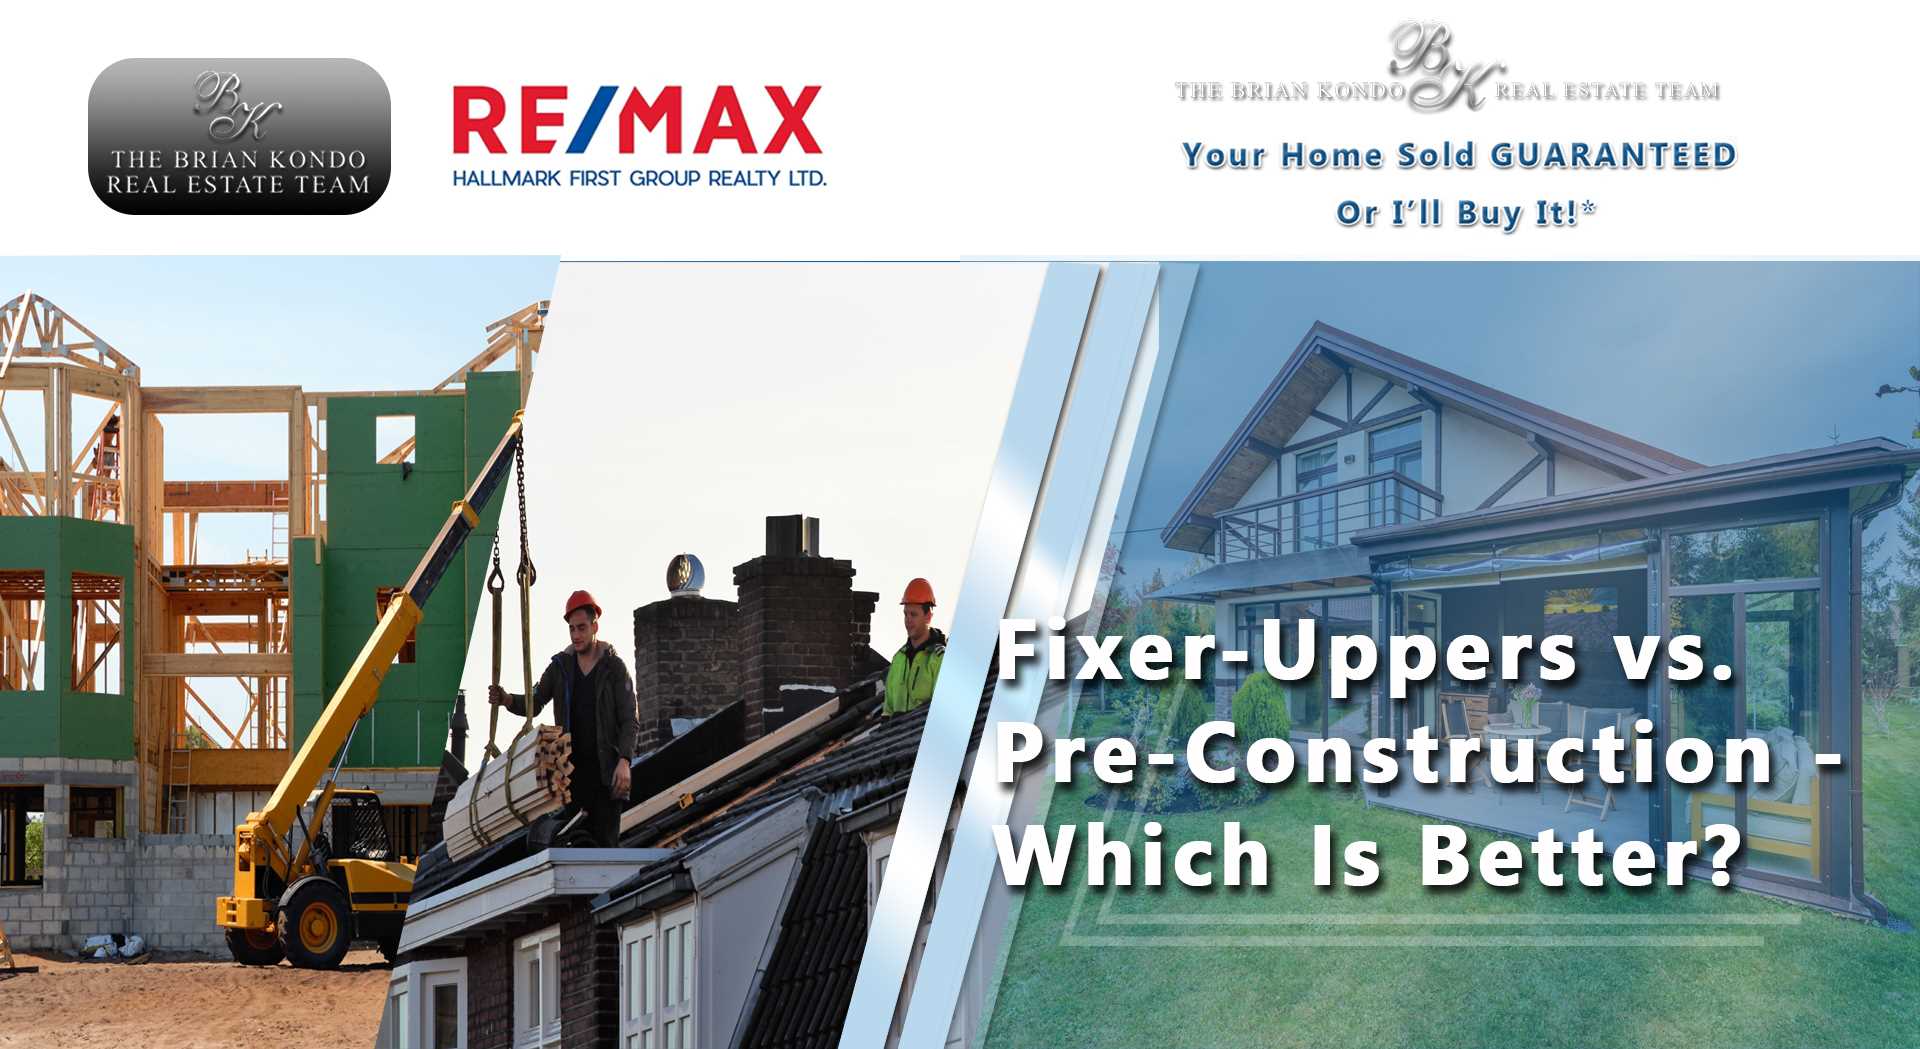 Fixer-Uppers vs. Pre-Construction - Which Is Better? 